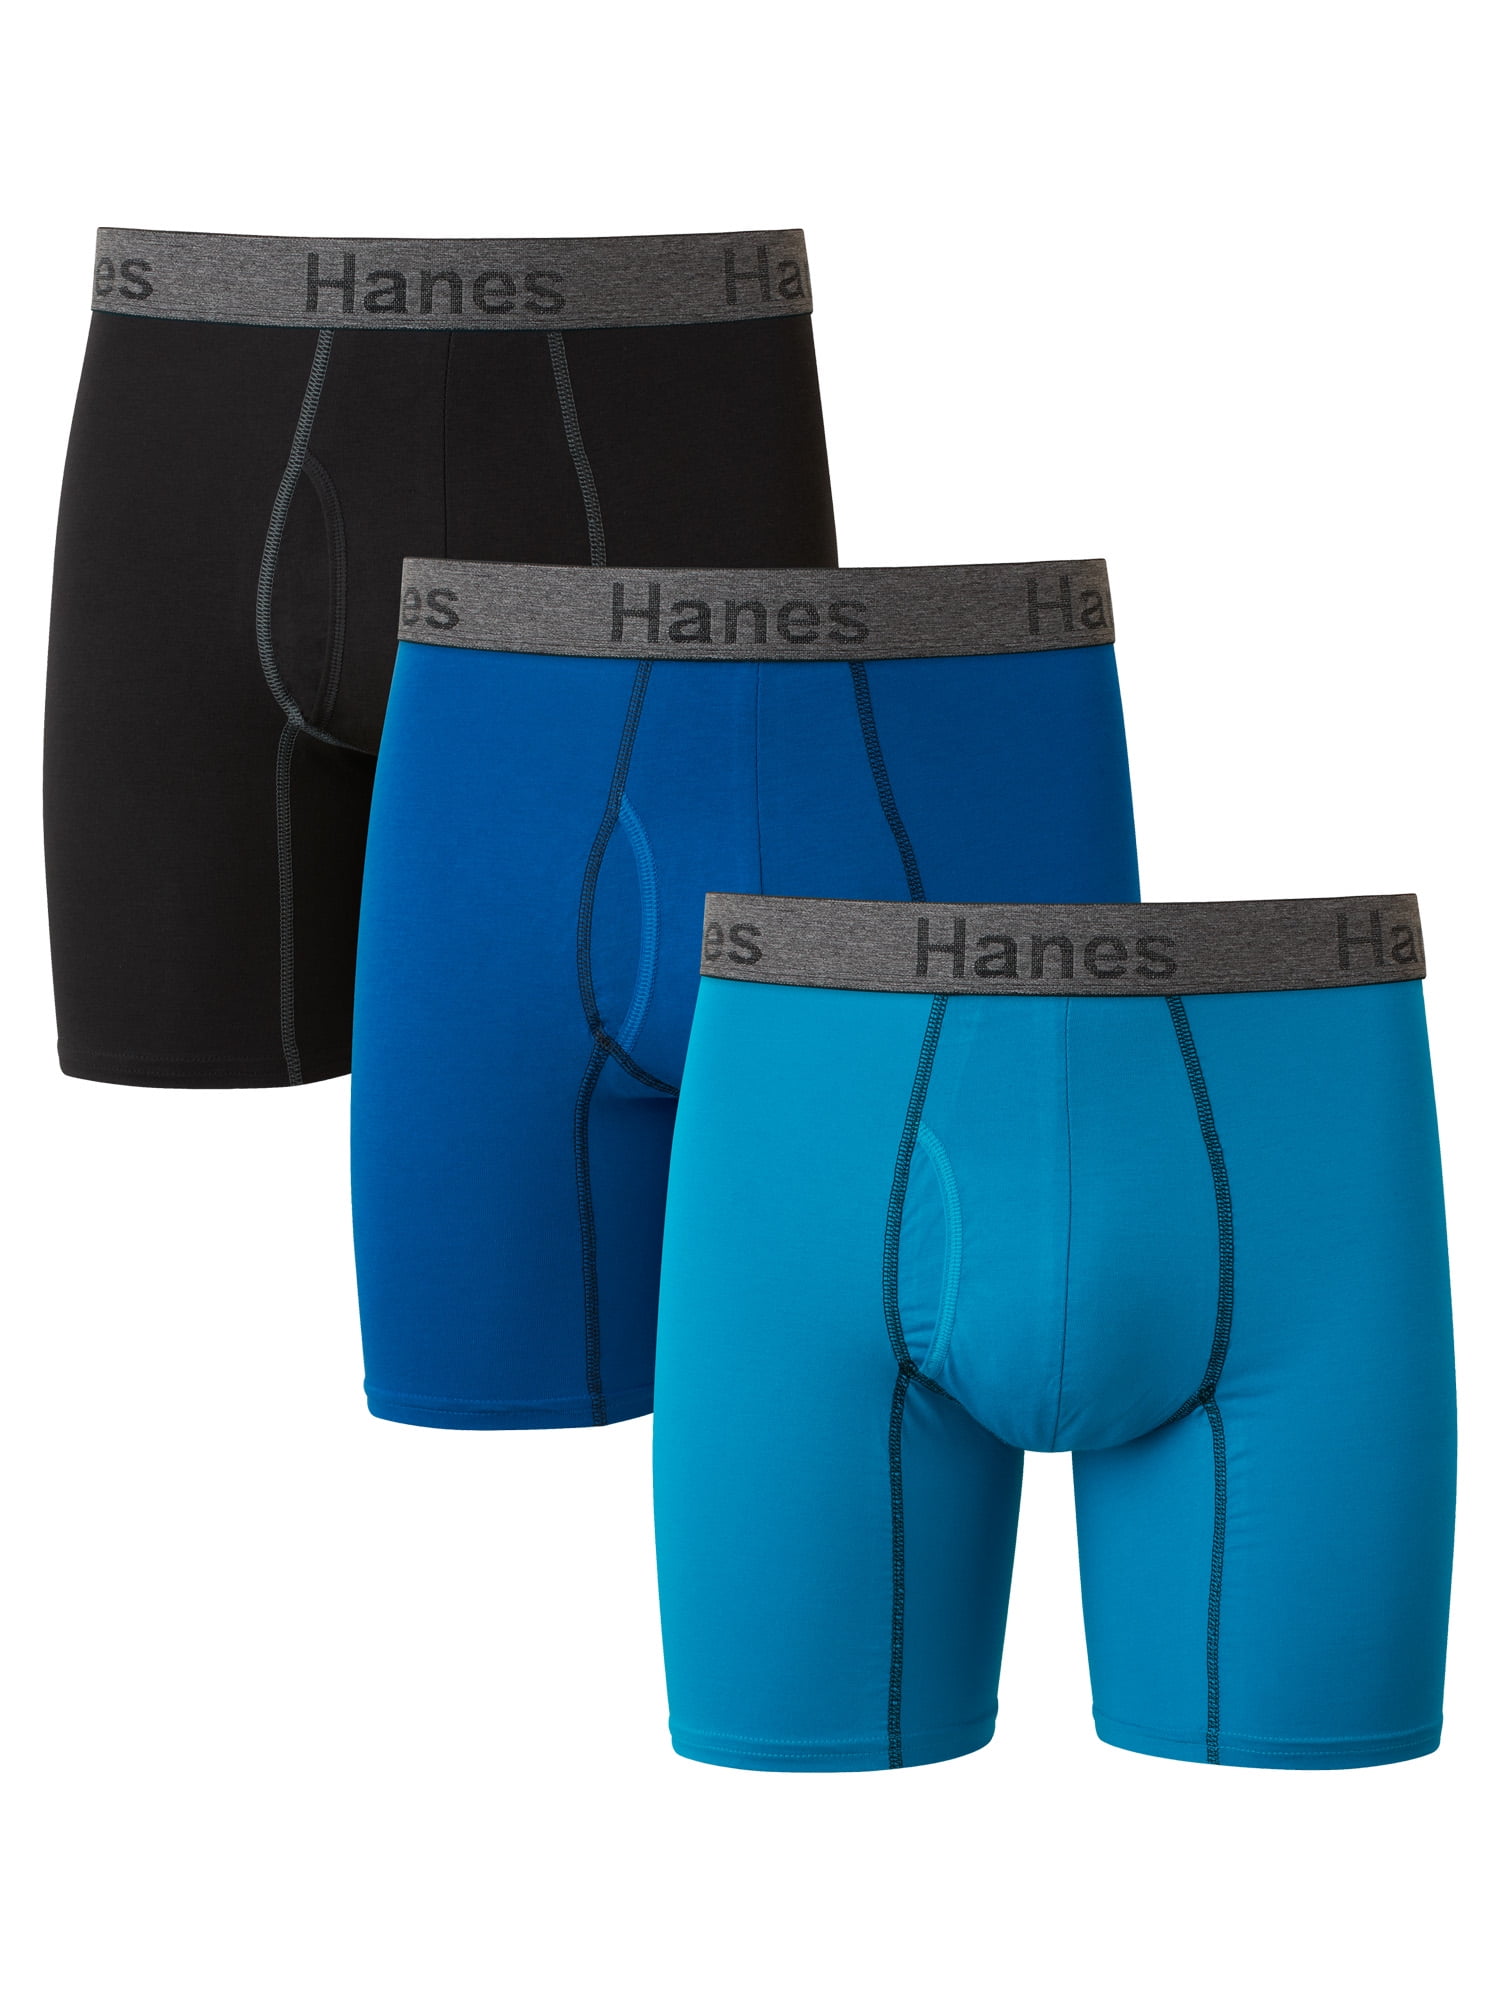 Hanes Men's 2-Pack Cool Comfort Breathable Mesh Boxer, Assorted, Size S  28-30